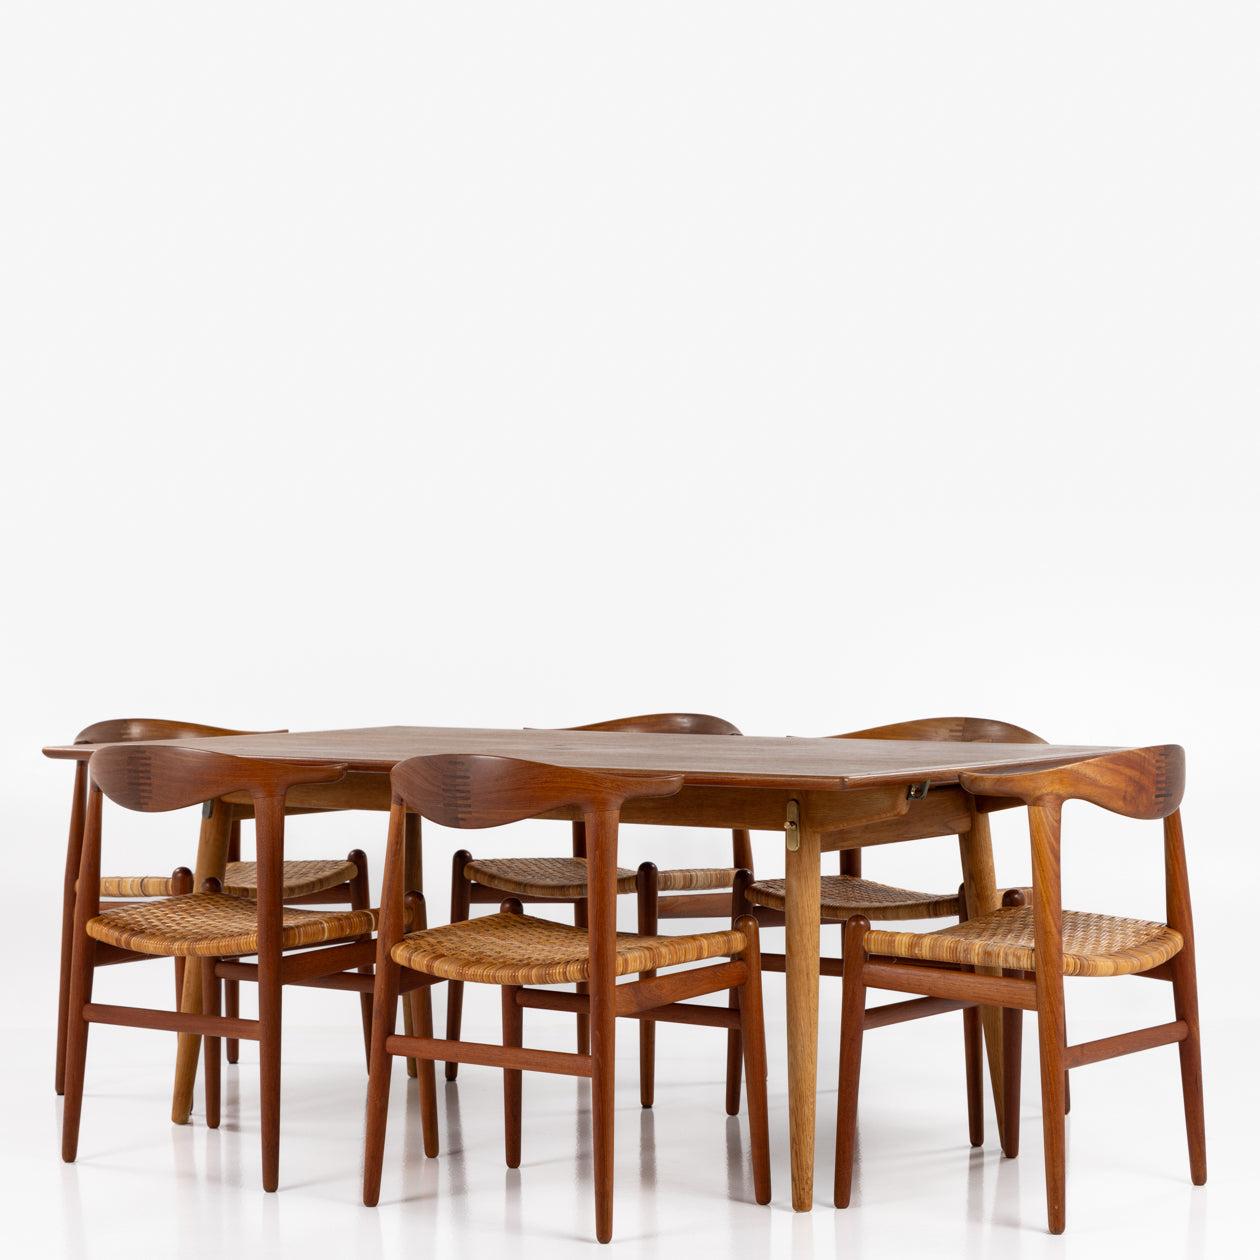 JH 505 - Set of 6 'Cow horn Chairs' in solid teak and patinated braided cane. Designed in 1952.